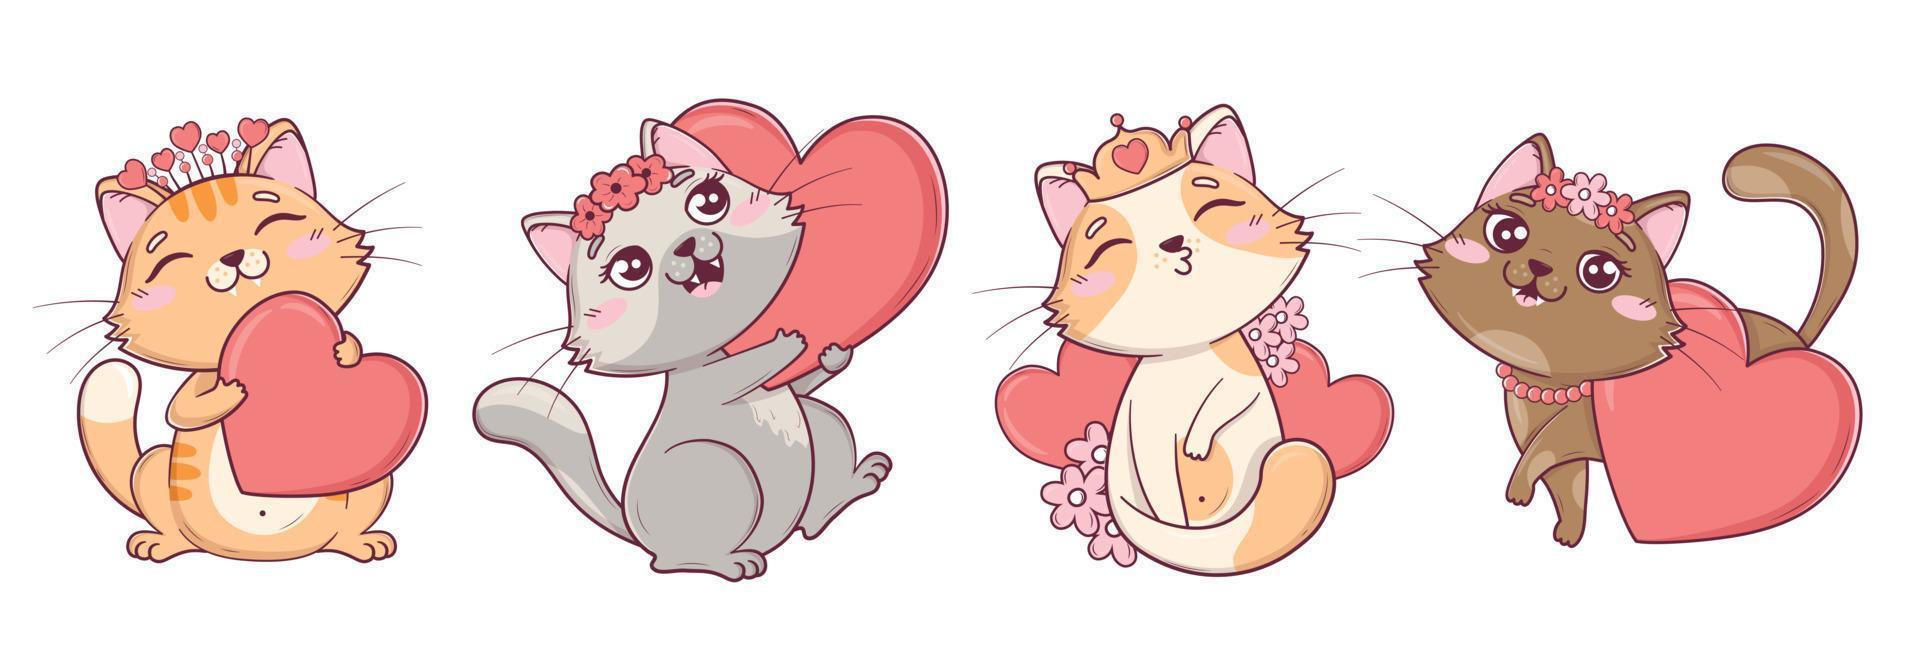 Collection of kawaii cute valentine cats in different poses with hearts and flowers vector